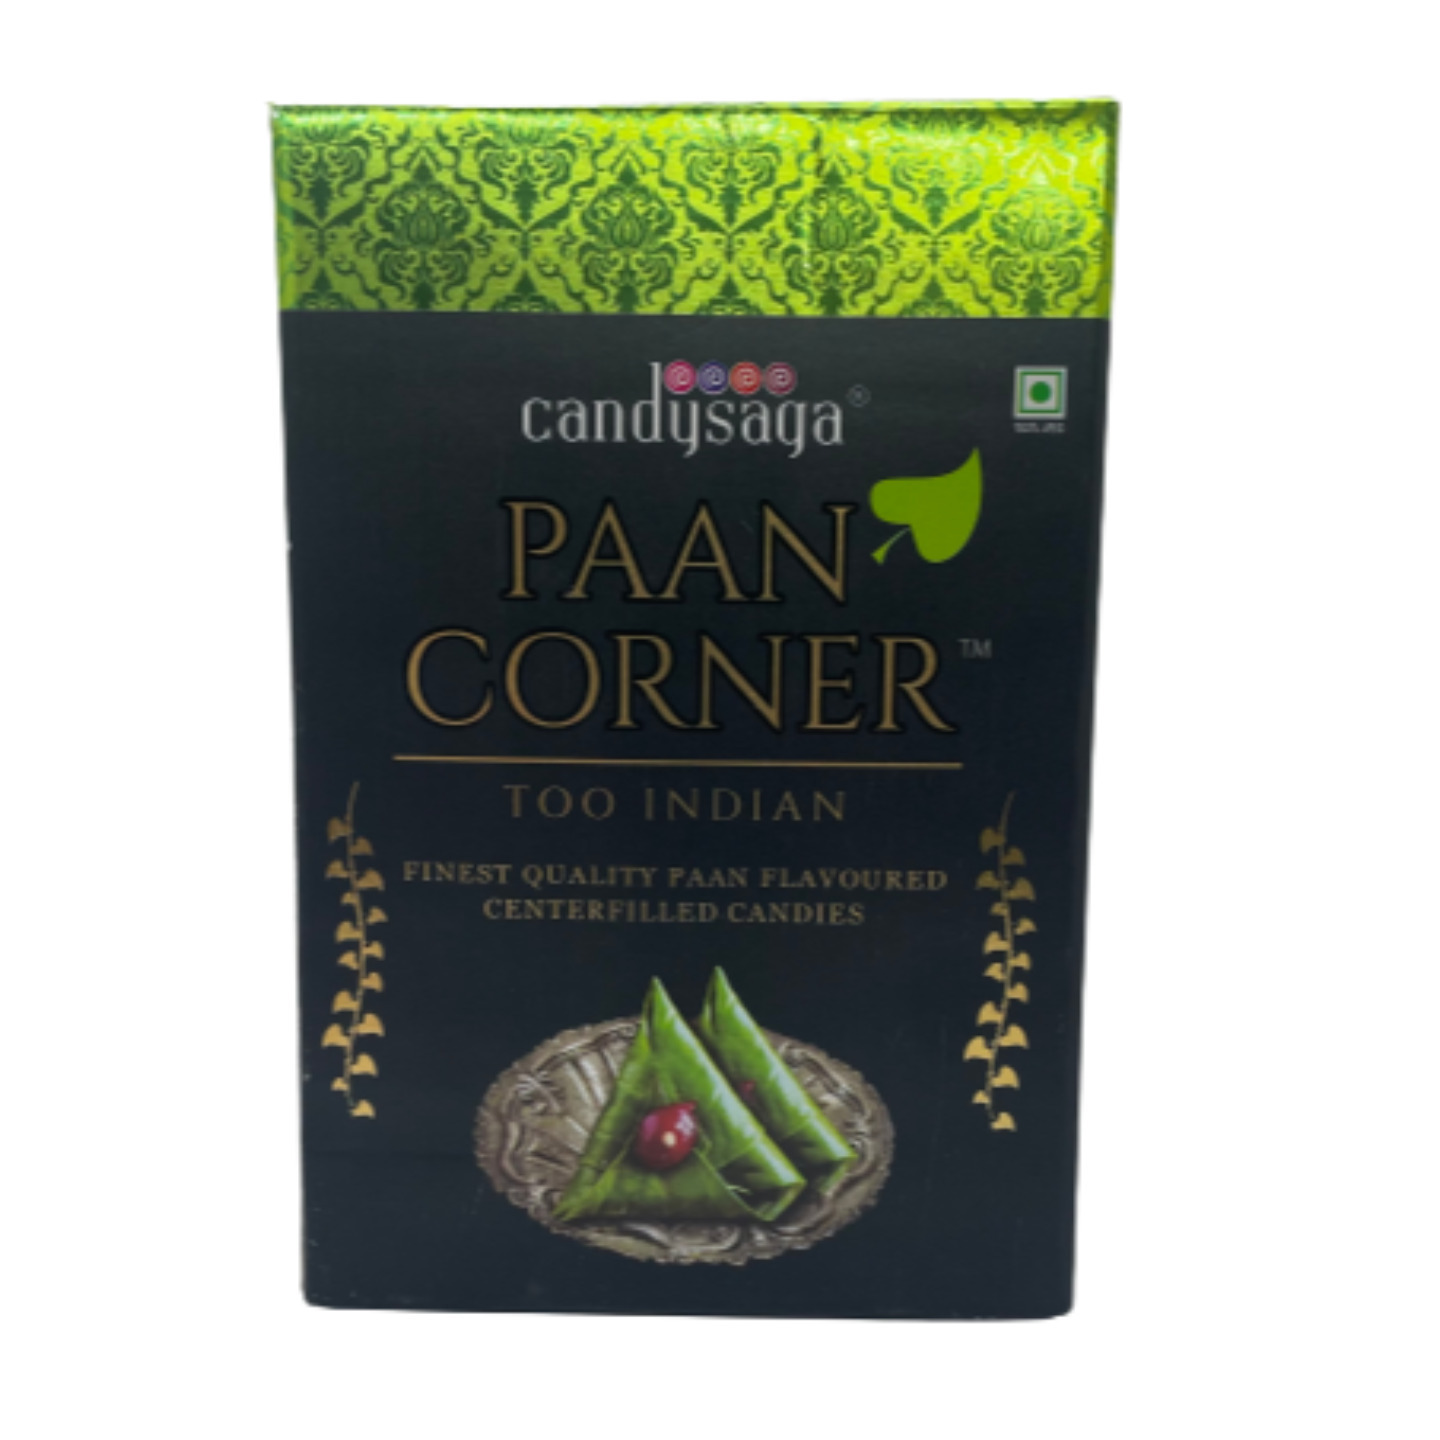 Candy saga Paan corner candy Pack of 2- 200 Pieces